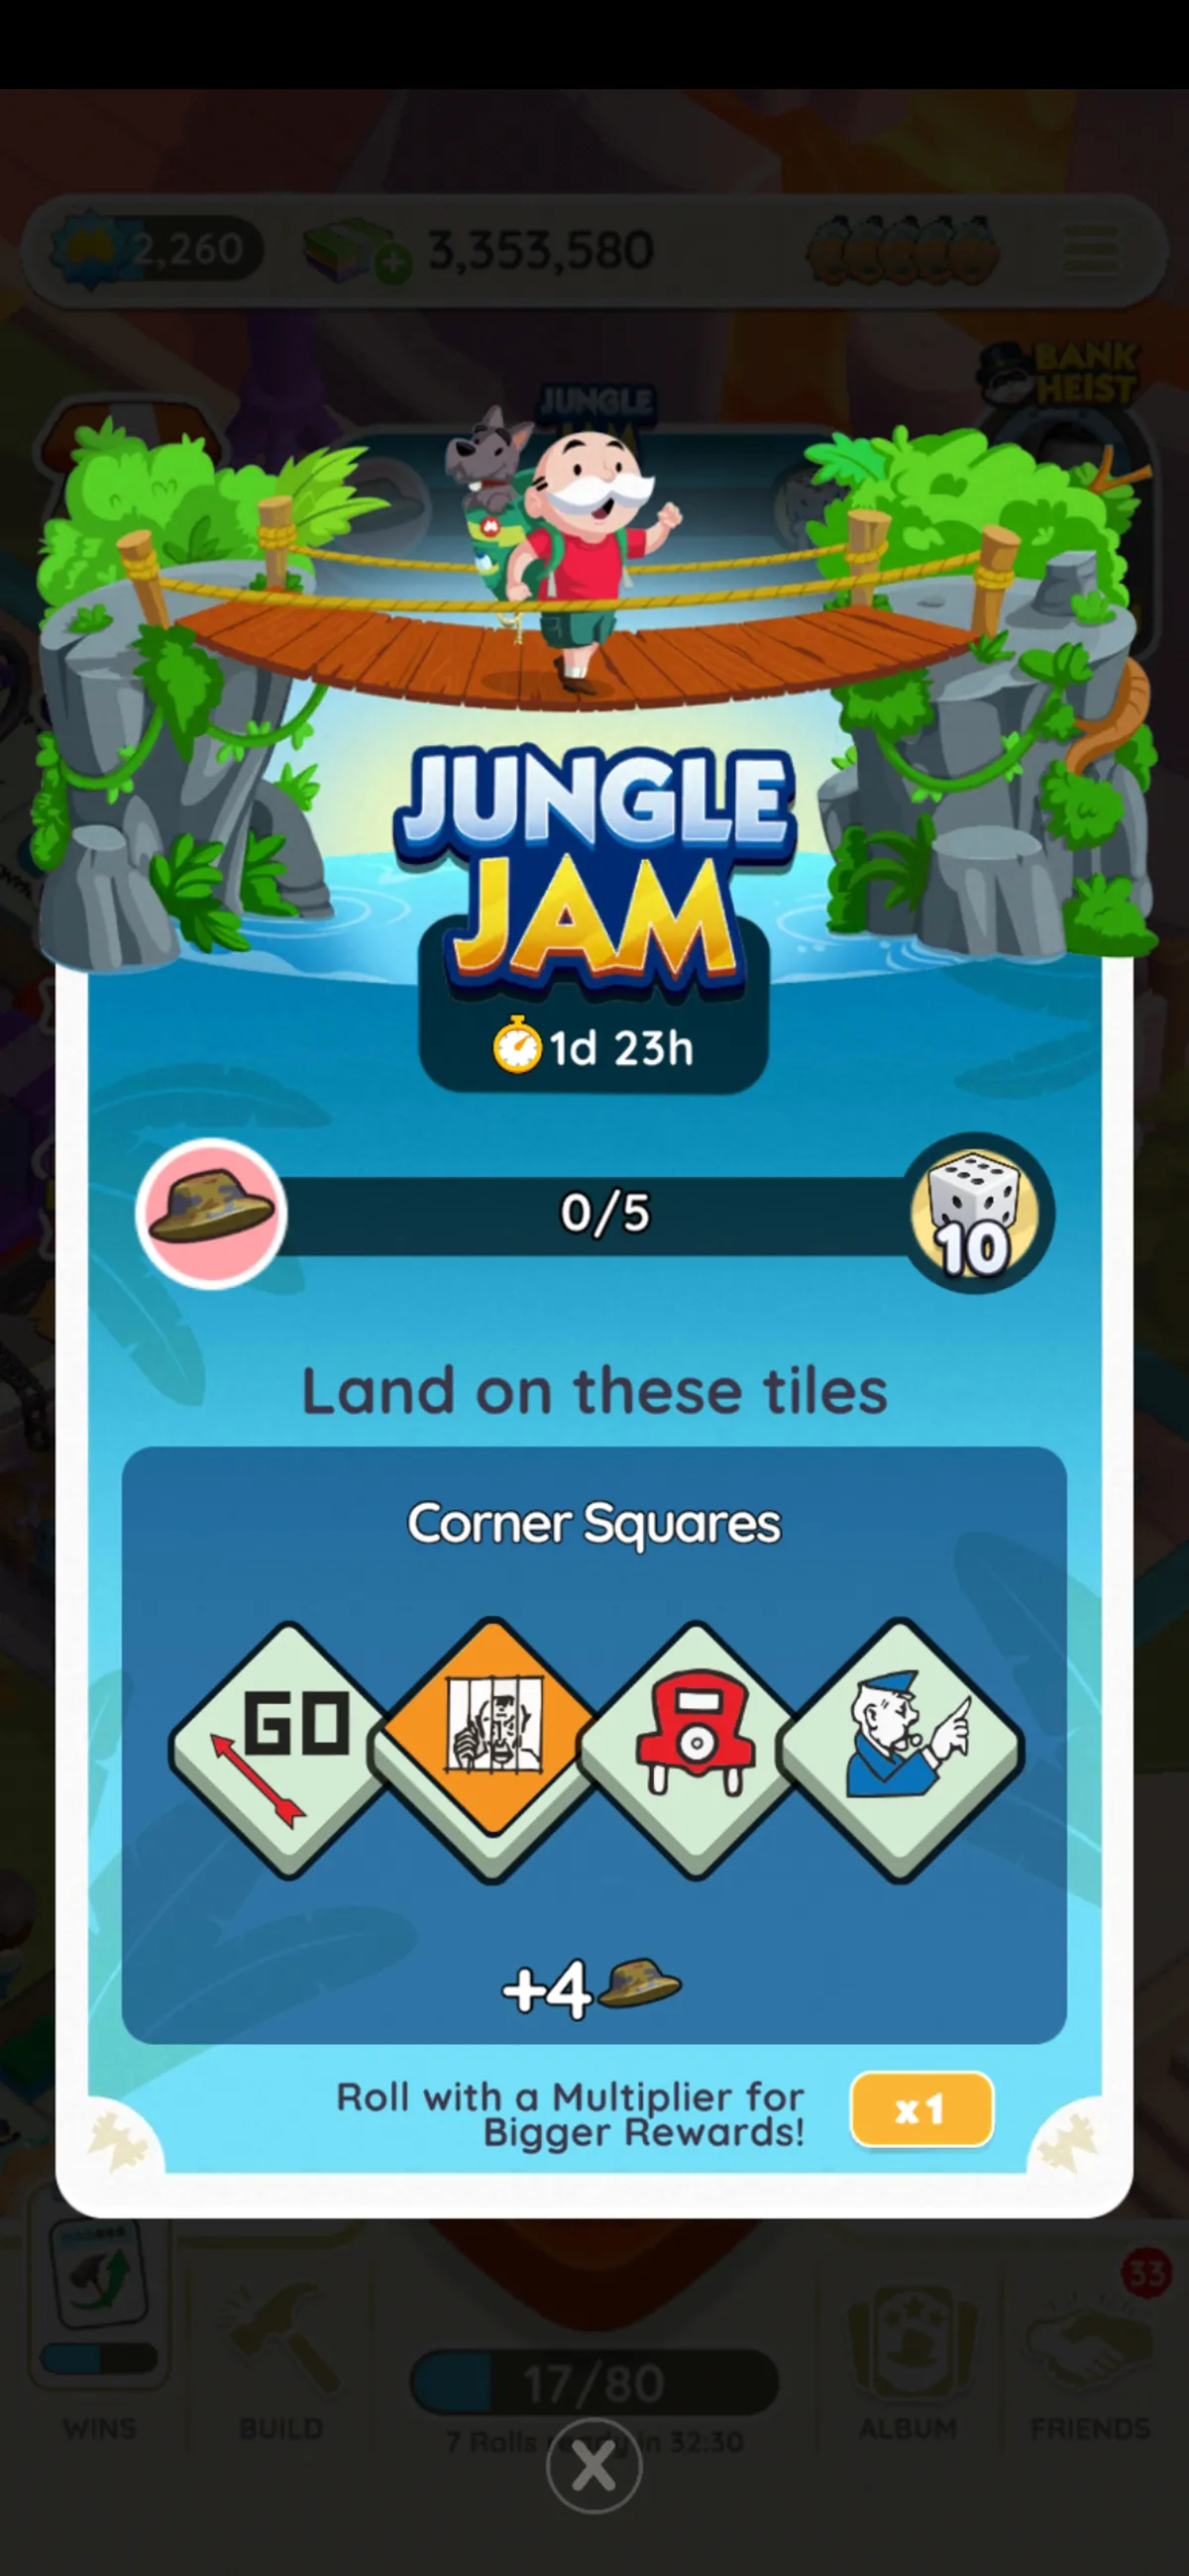 An image for the Jungle Jam event in Monopoly GO showing all the rules for the event as part of an article on the available rewards and milestones, as well as how to win. The picture shows Rich Uncle Pennybags crossing a rickety wooden rope bridge over a river and the logo for the event. There's a dog on his back.